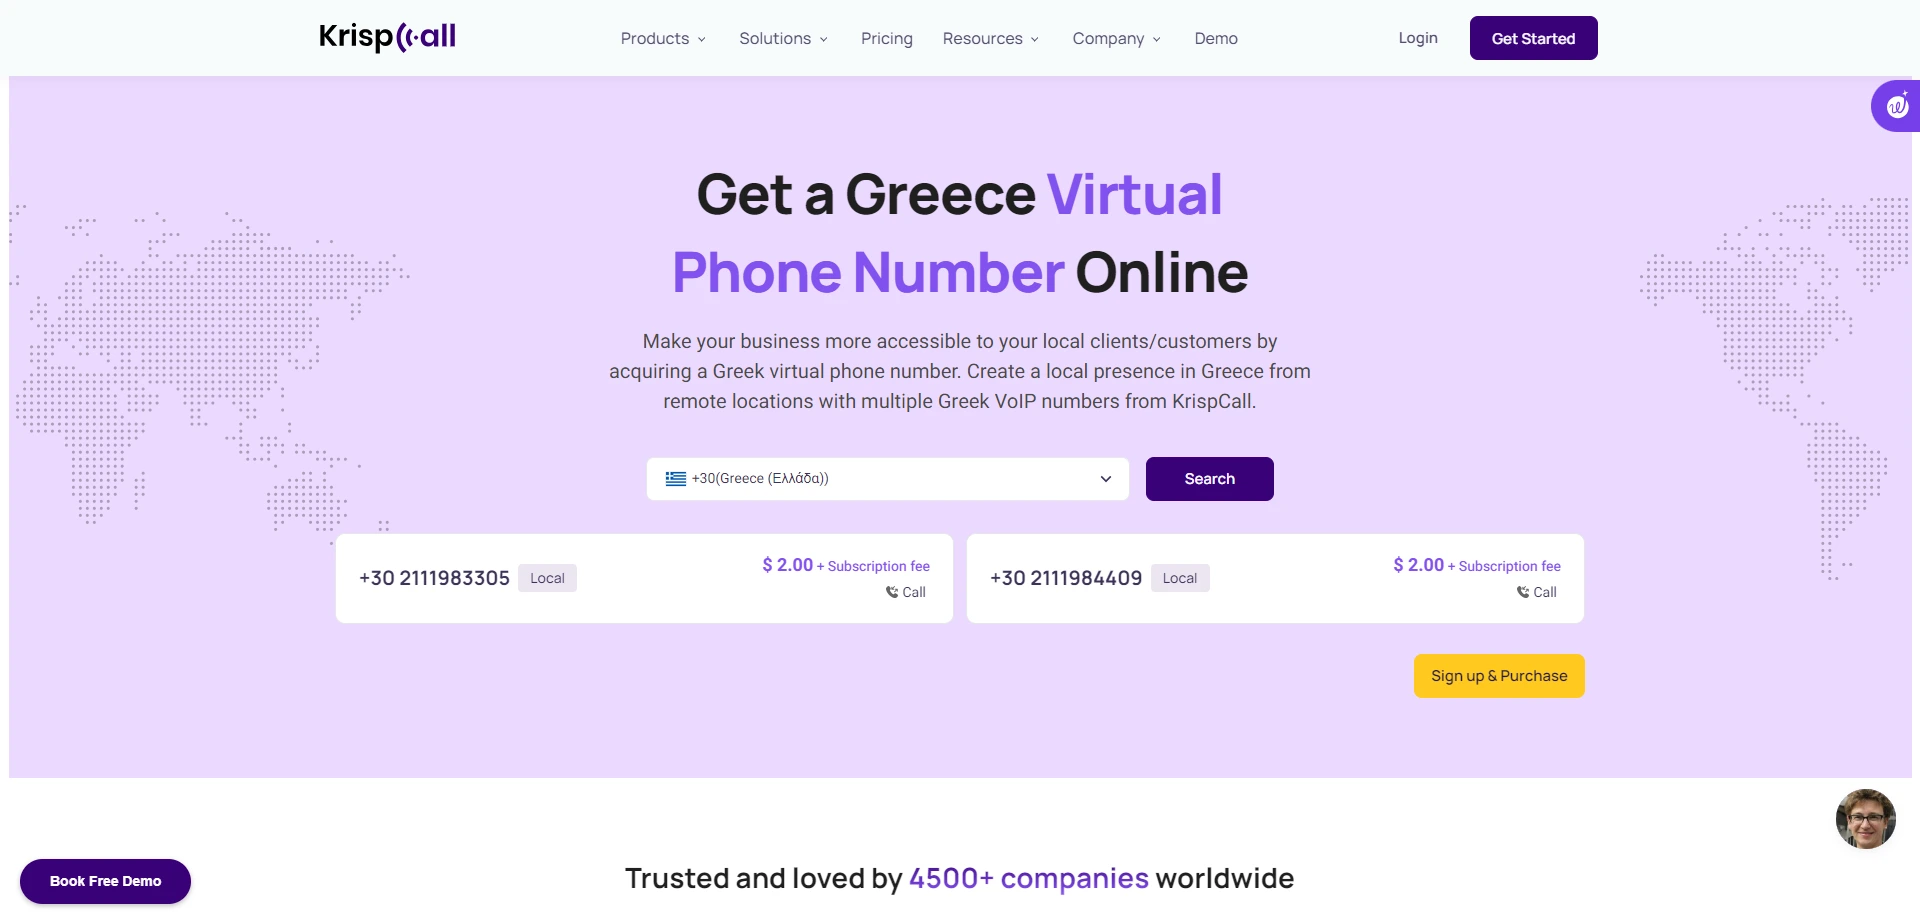 KrispCall as a Greece Virtual Phone Number provider